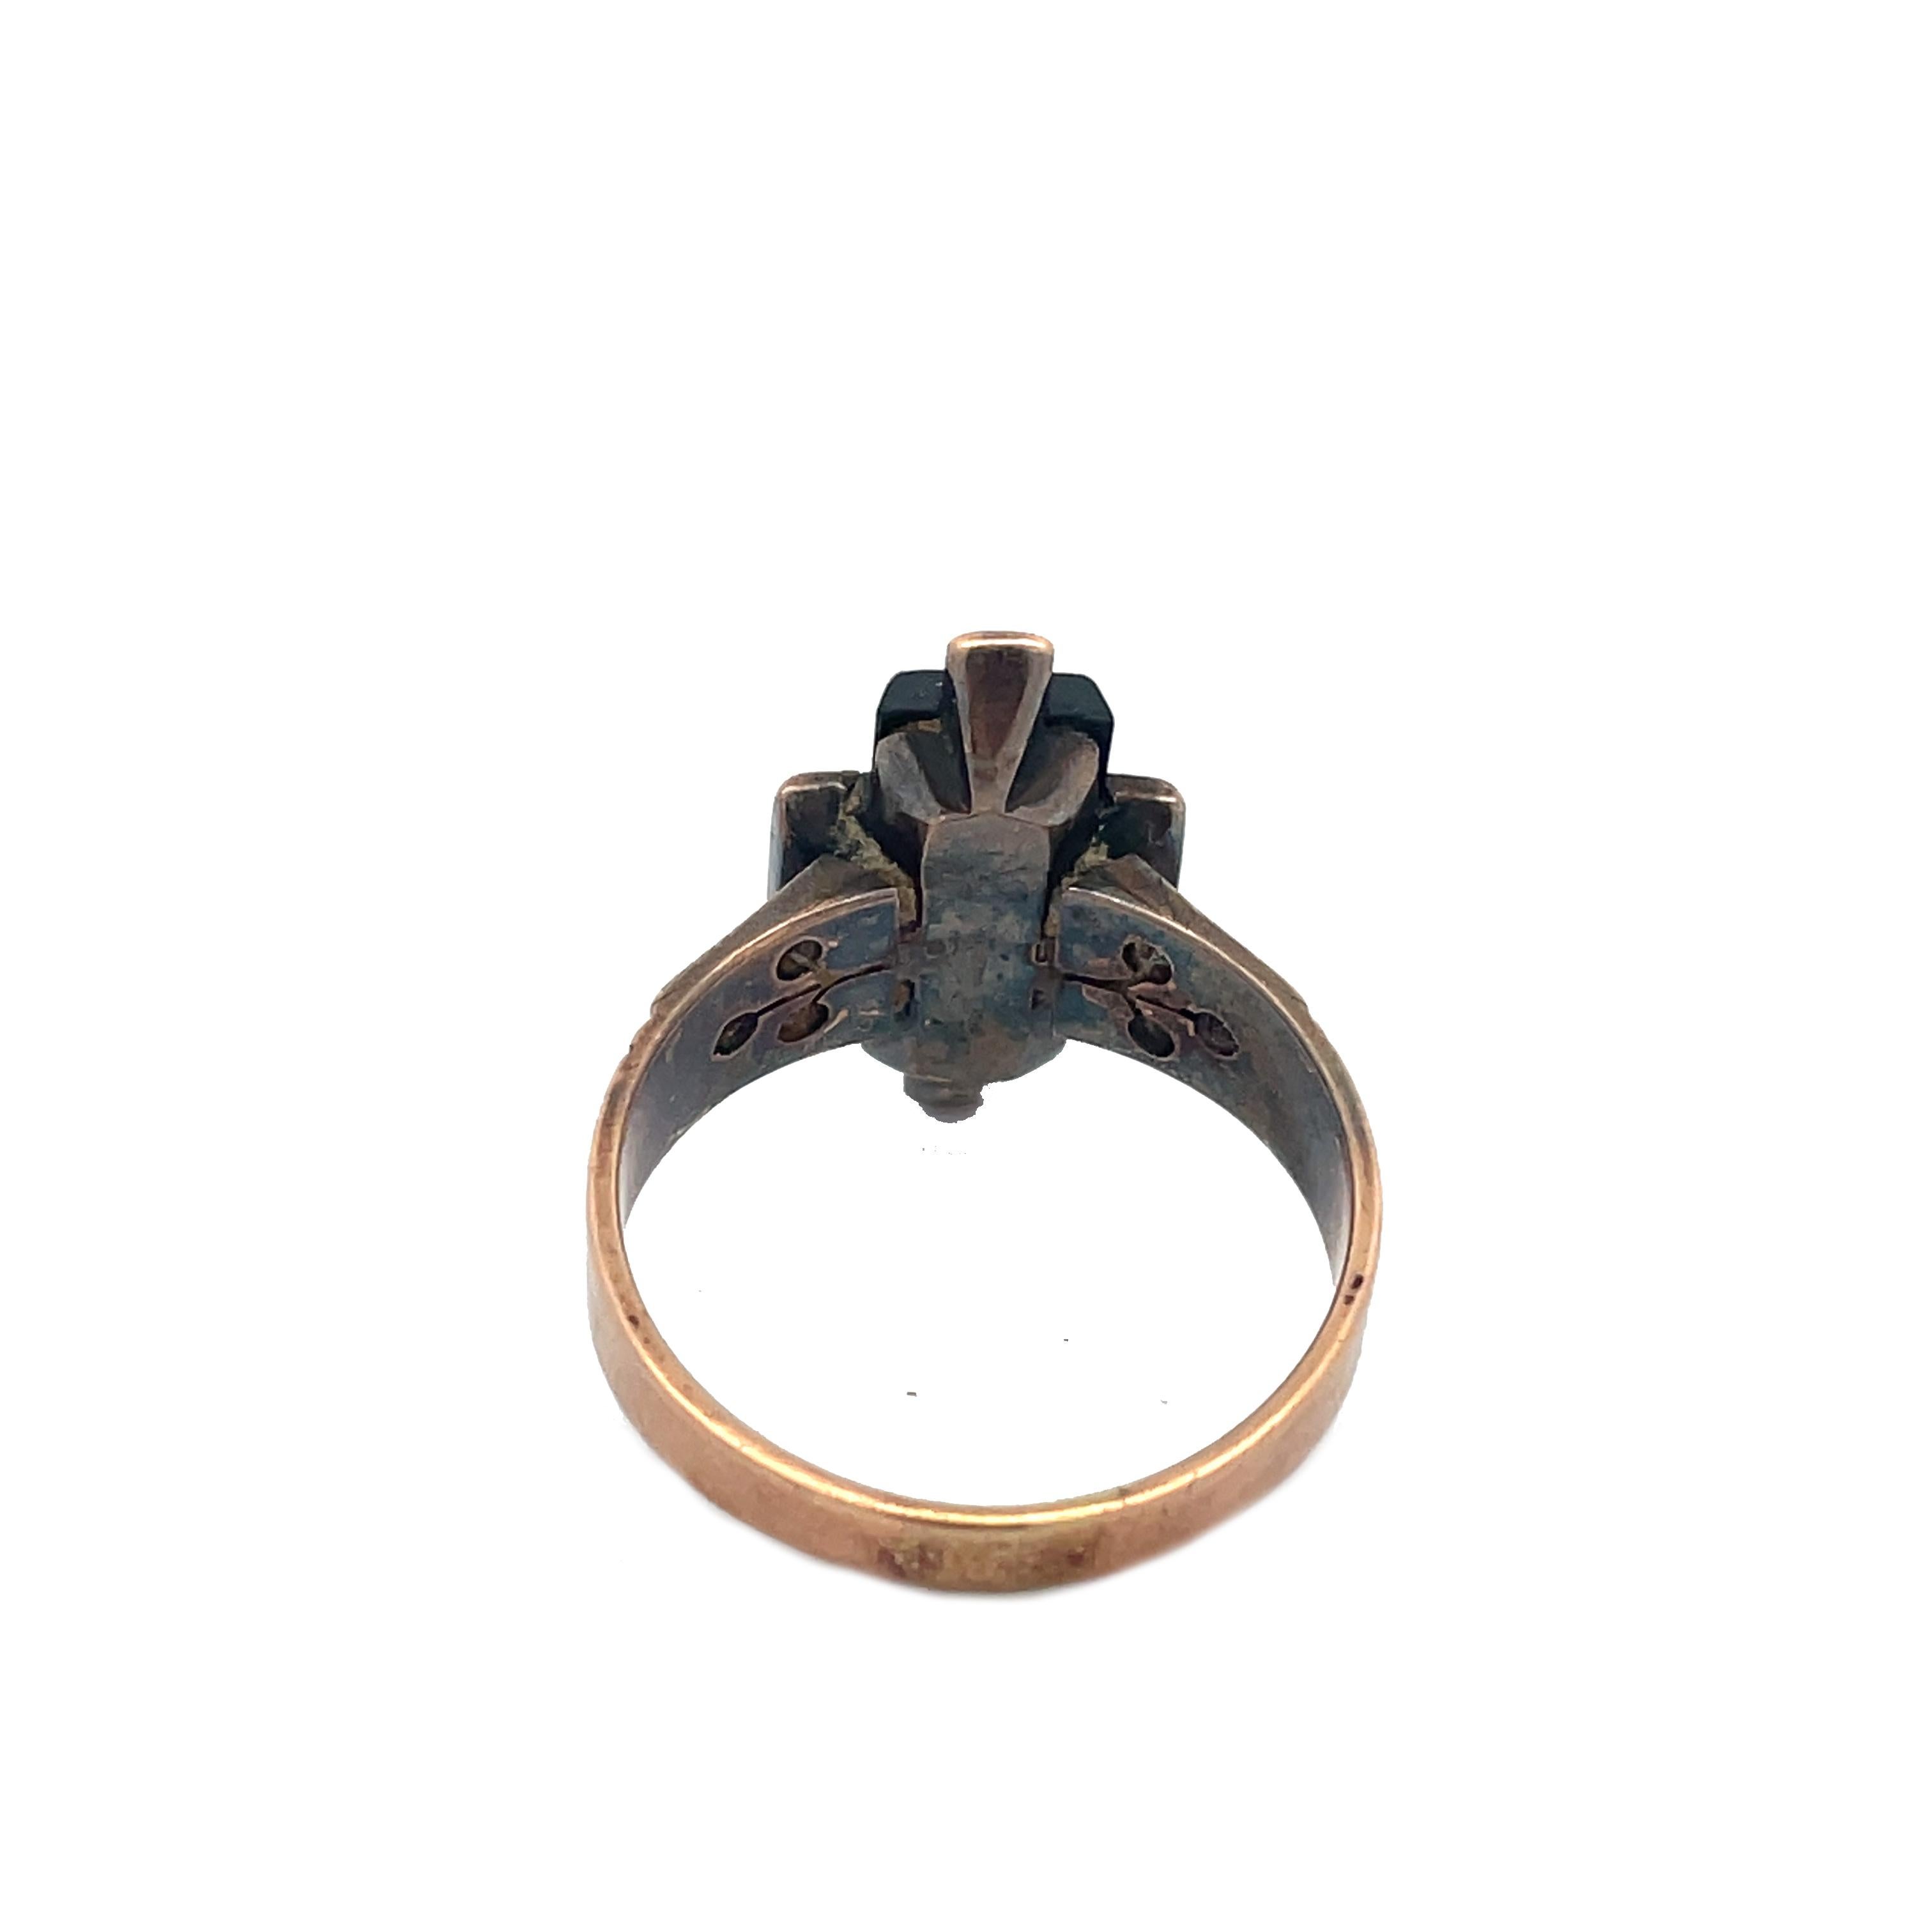 1880 Victorian Black Onyx and Pearl Rose Gold Ring 4